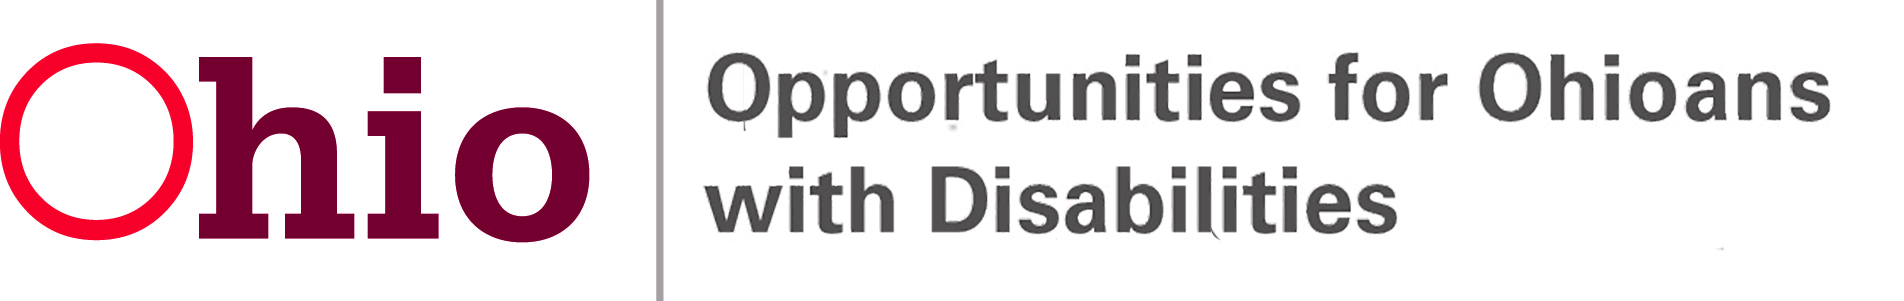 Opportunities for Ohioans with Disibilties Logo